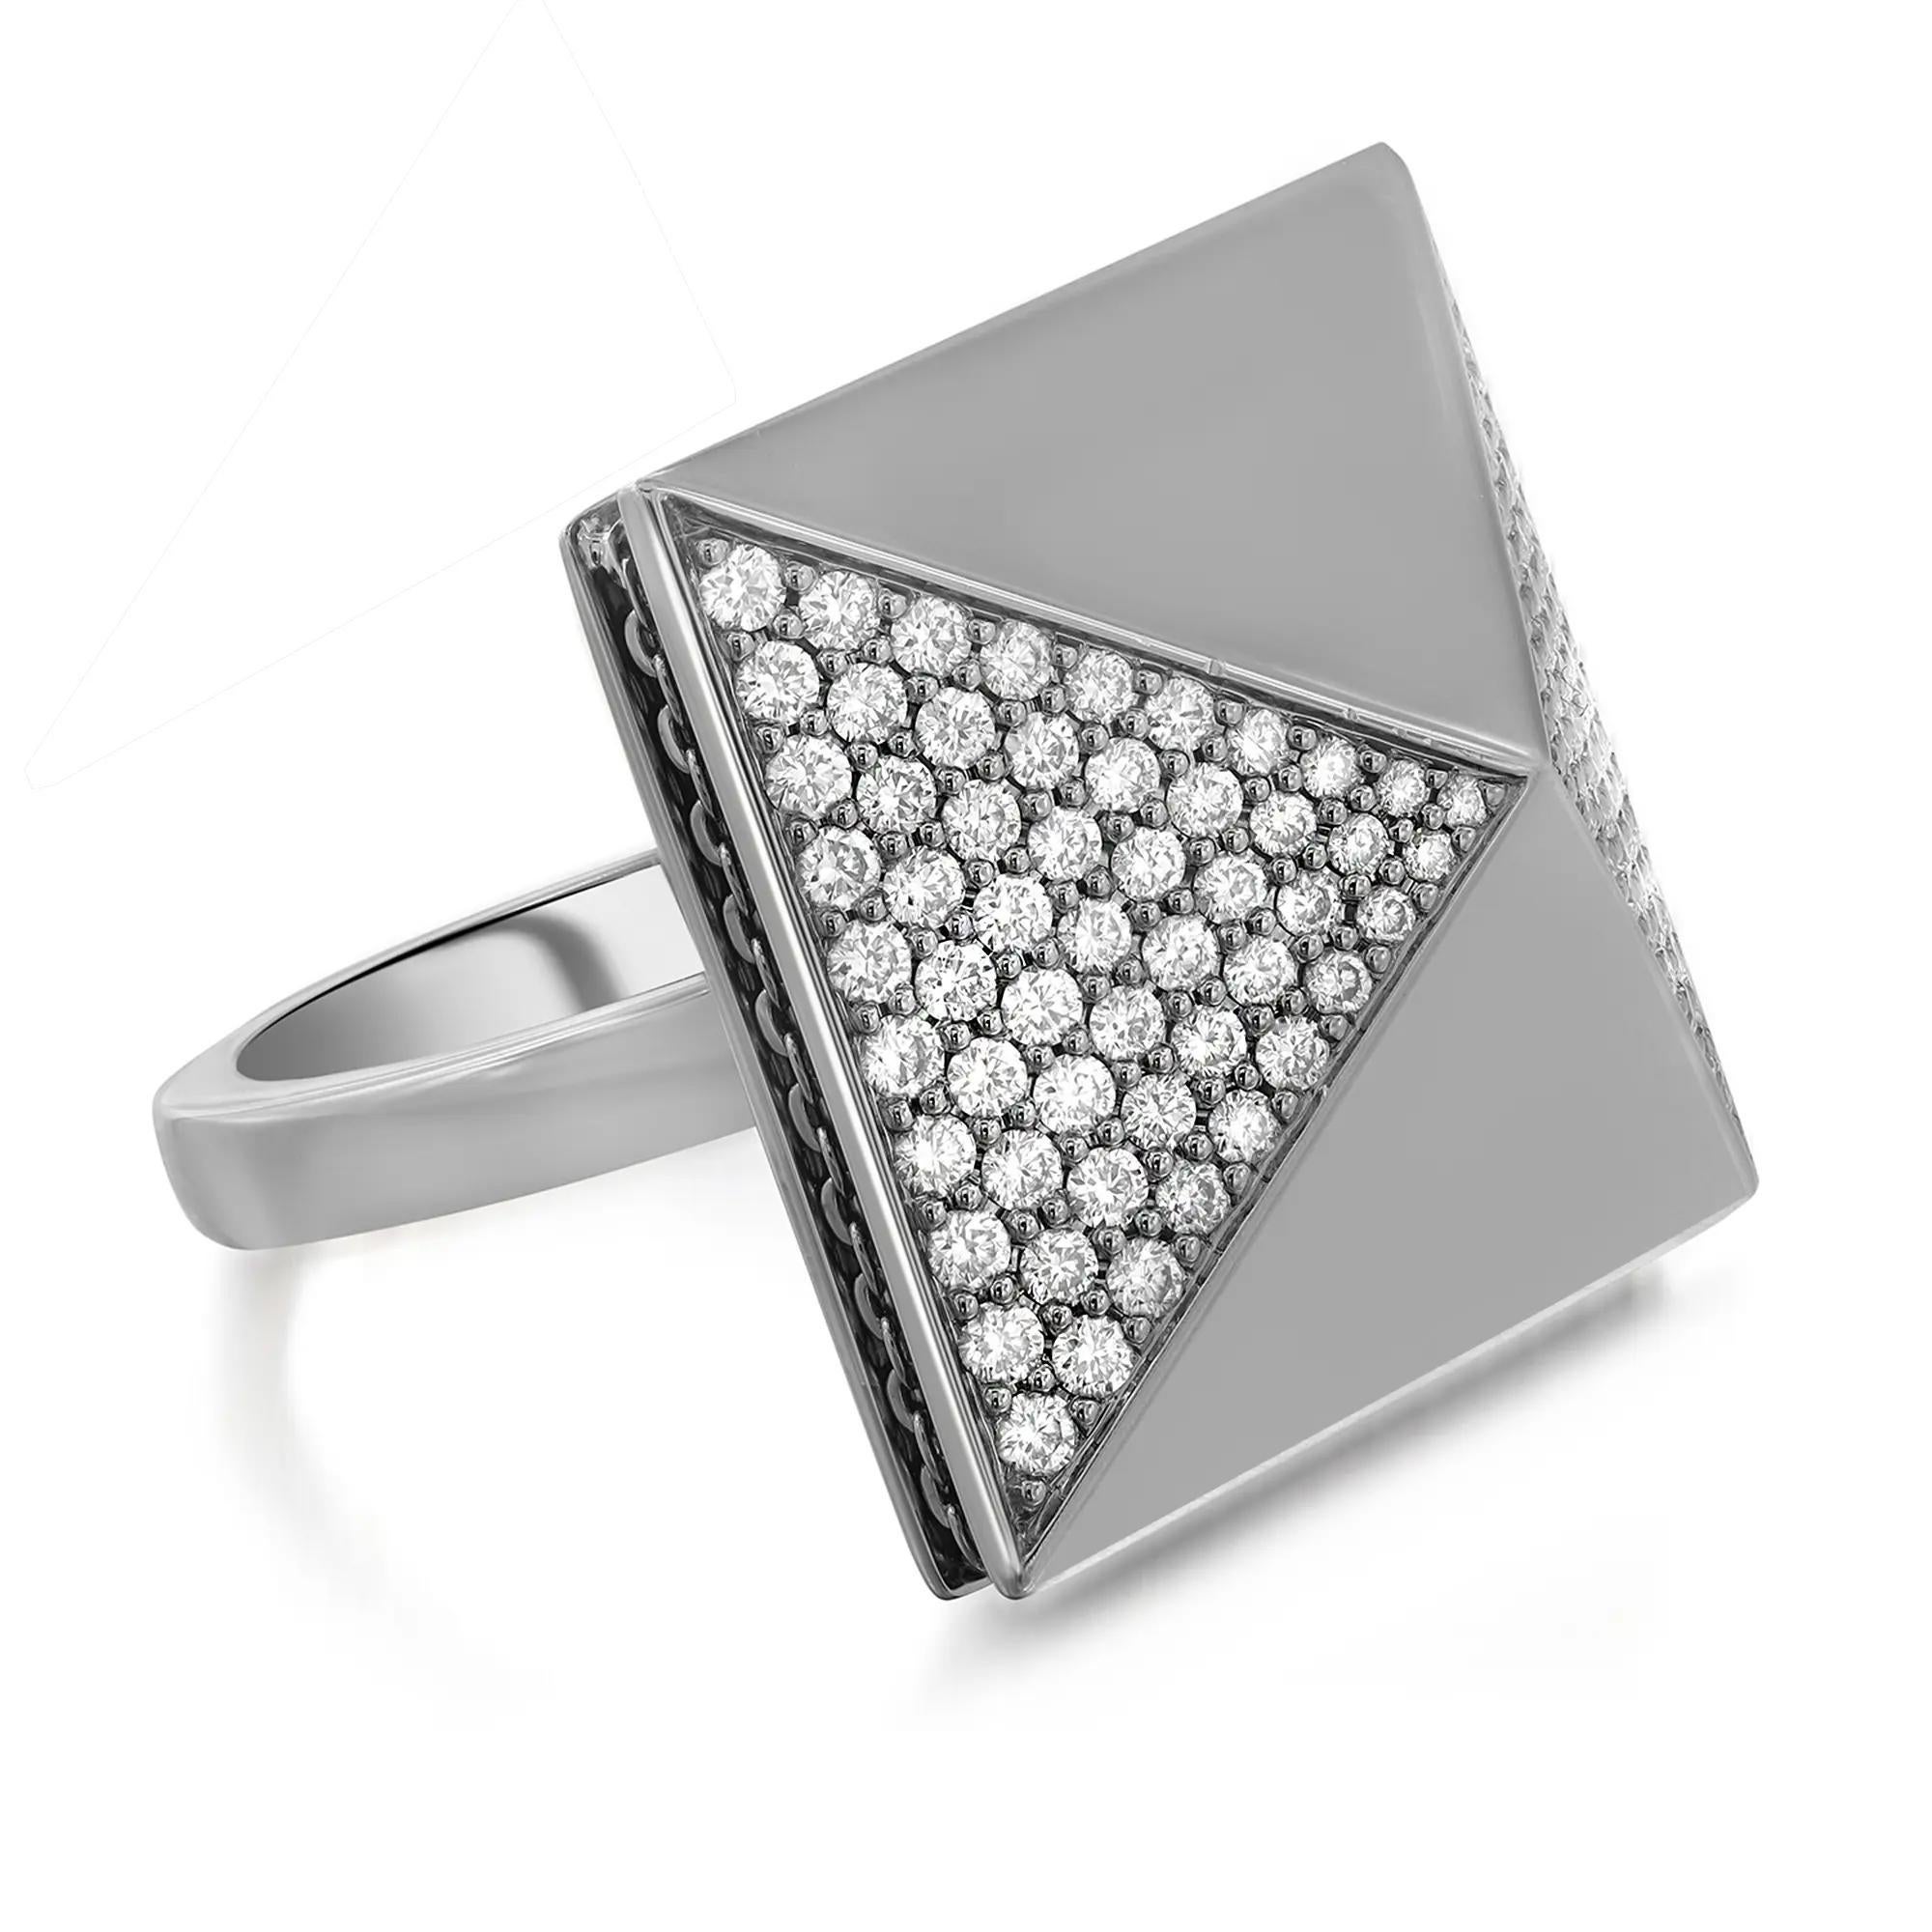 Modern Messika 1.06Cttw Spiky Diamond Cocktail Ring 18K Black Gold Size 53 US 6.5 For Sale